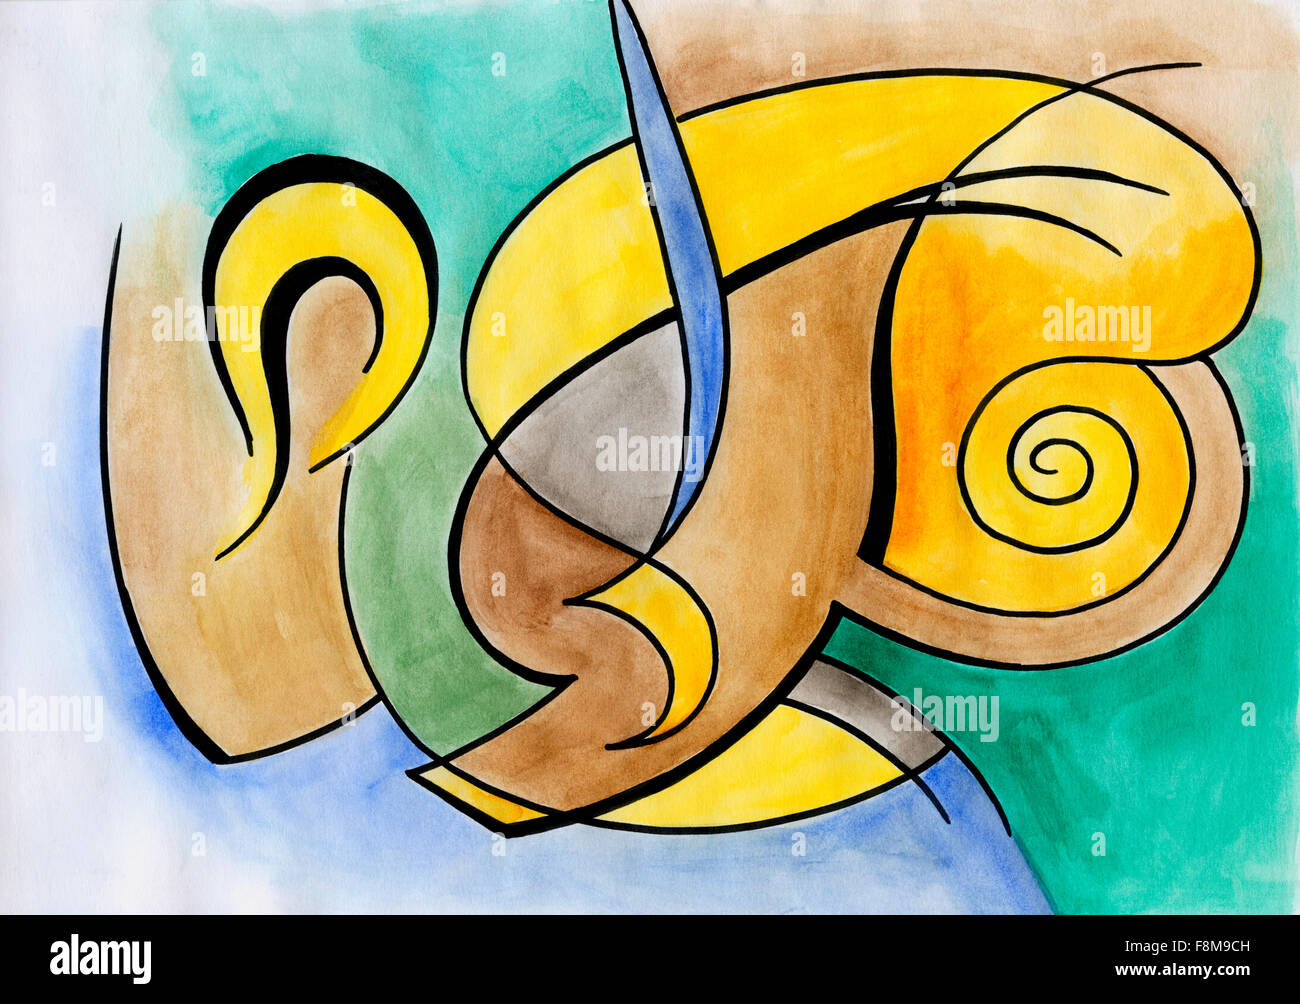 Abstract artwork with different shapes and lines. Handmade illustration executed in modern abstract style. Stock Photo